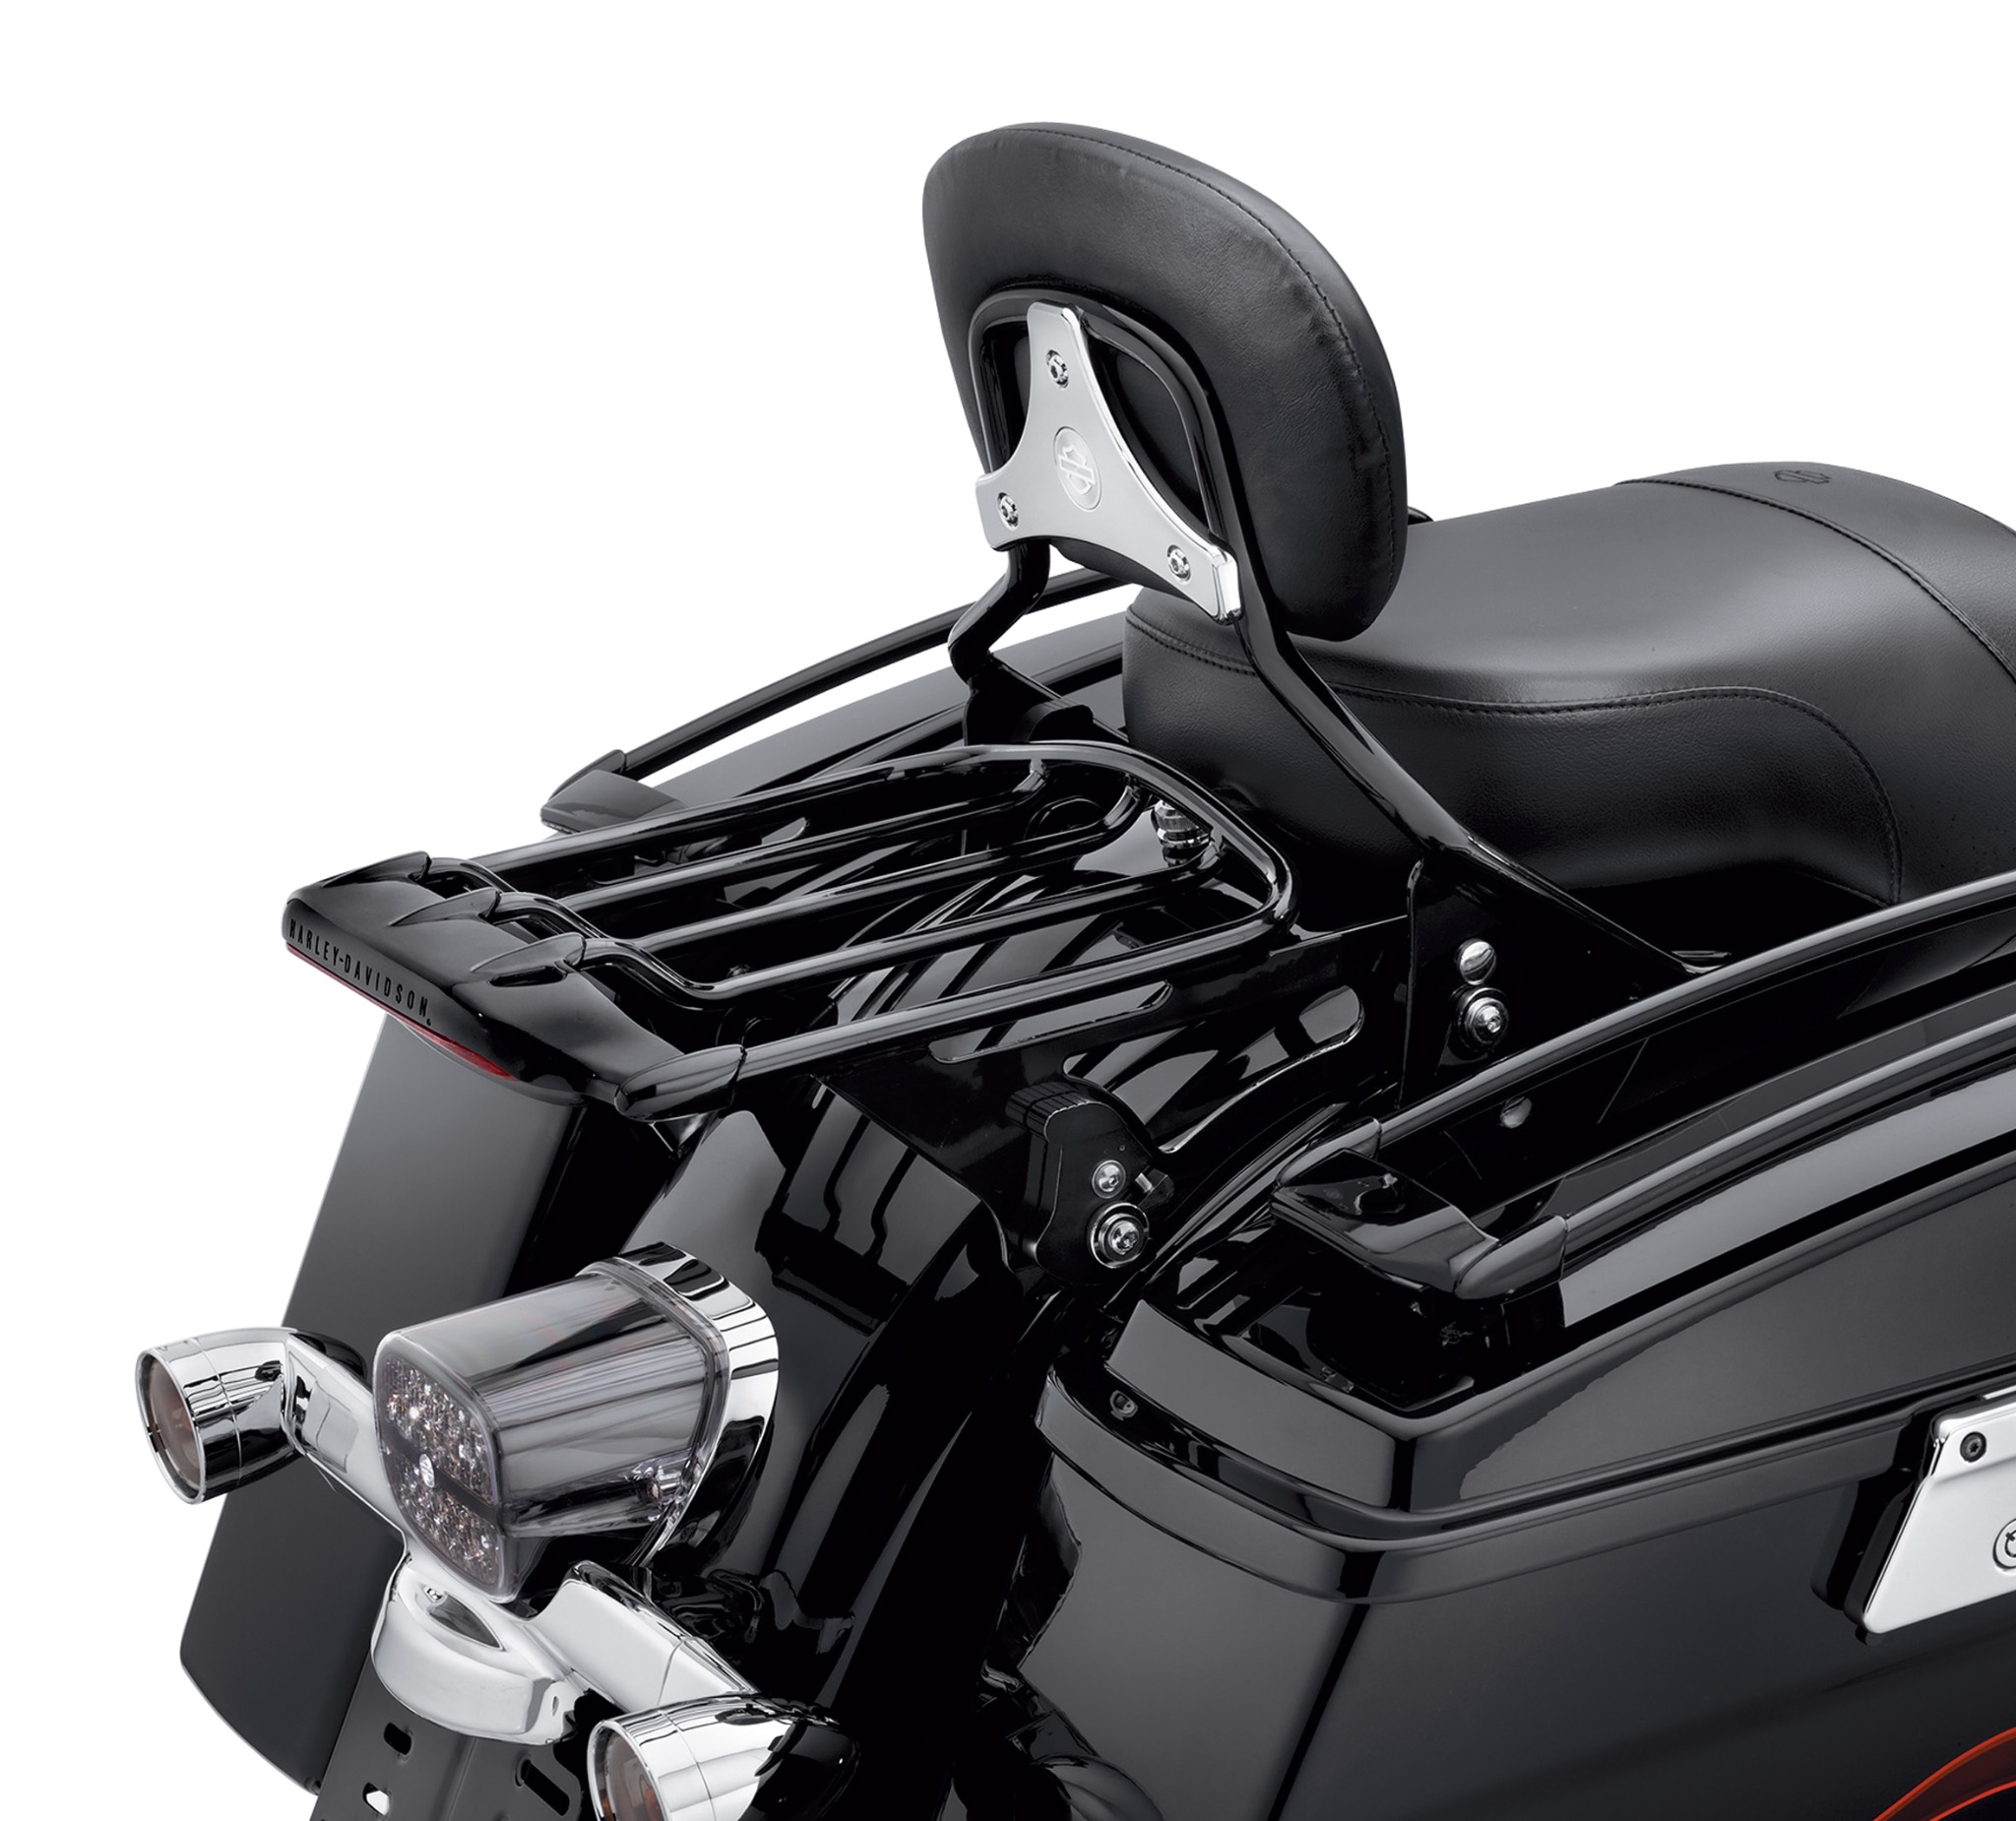 Chrome 2 Up Air Wing Luggage Rack For Harley Street Glide Road Glide FLTR FLHX